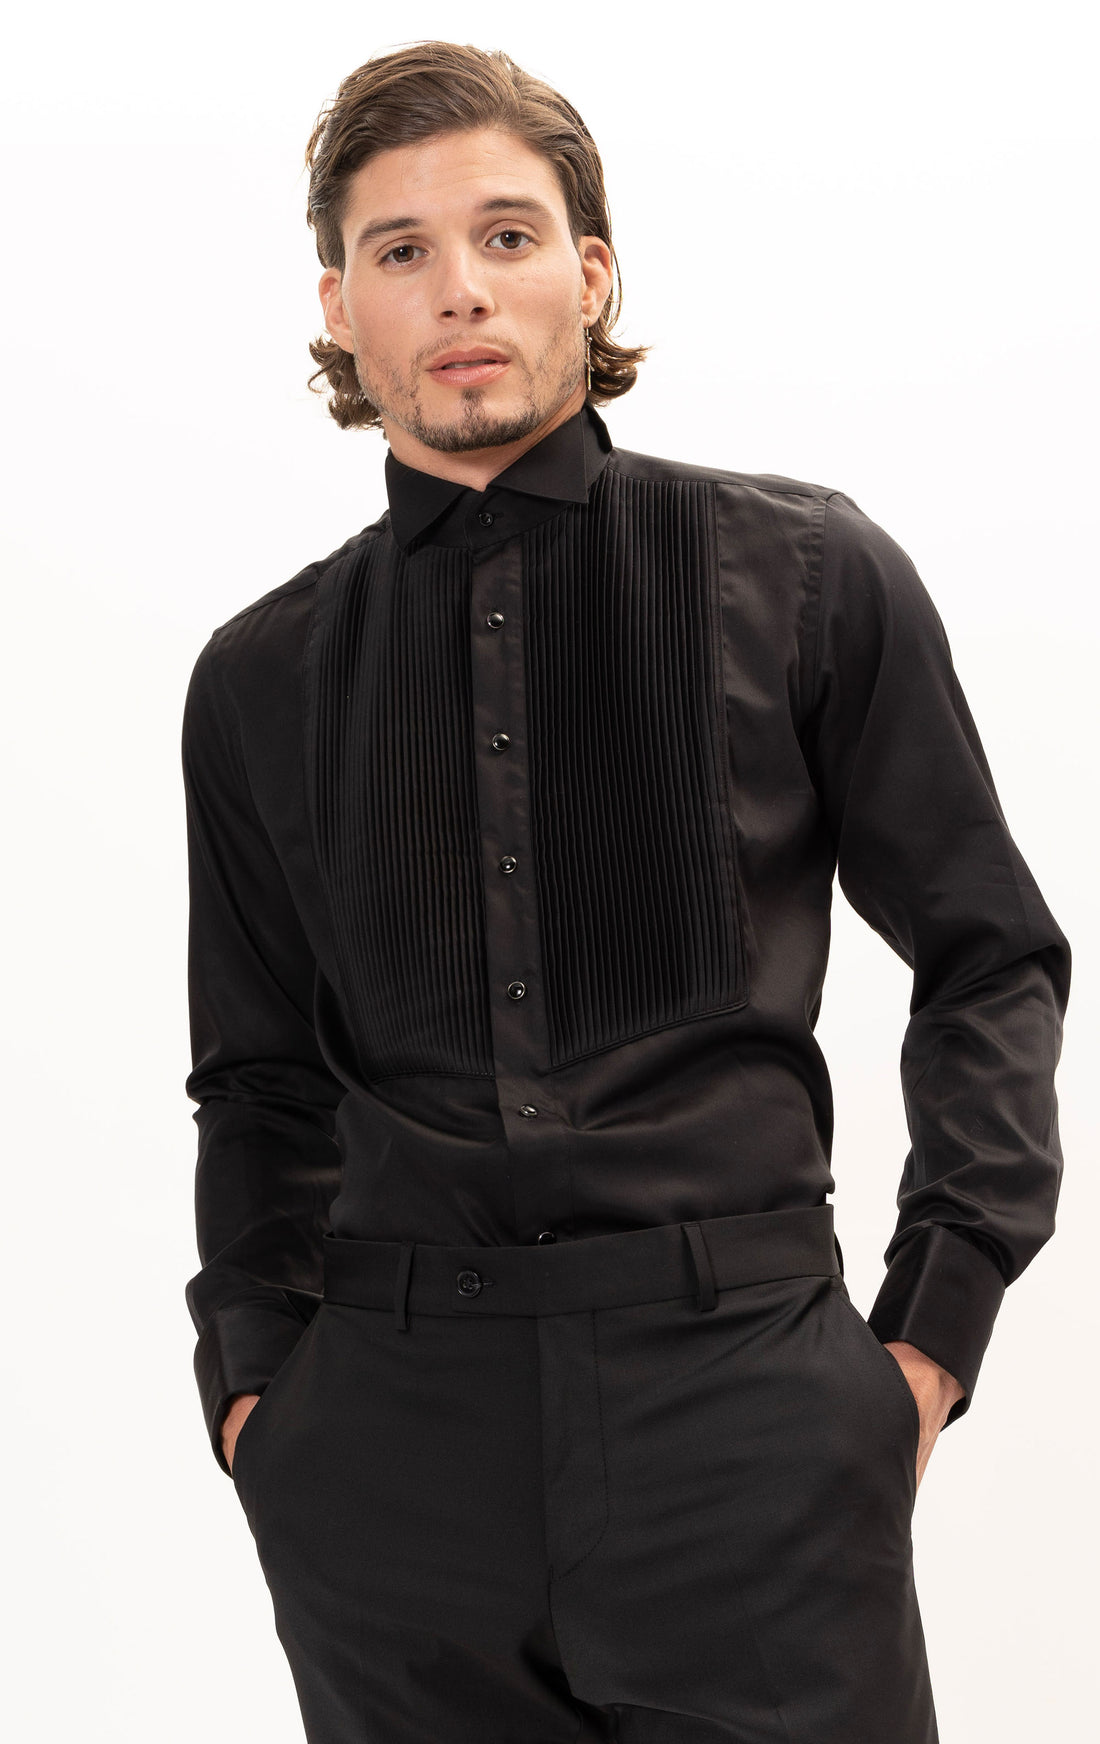 N° 4686 PURE COTTON PLEATED WING TIP COLLAR SHIRT - BLACK BLACK